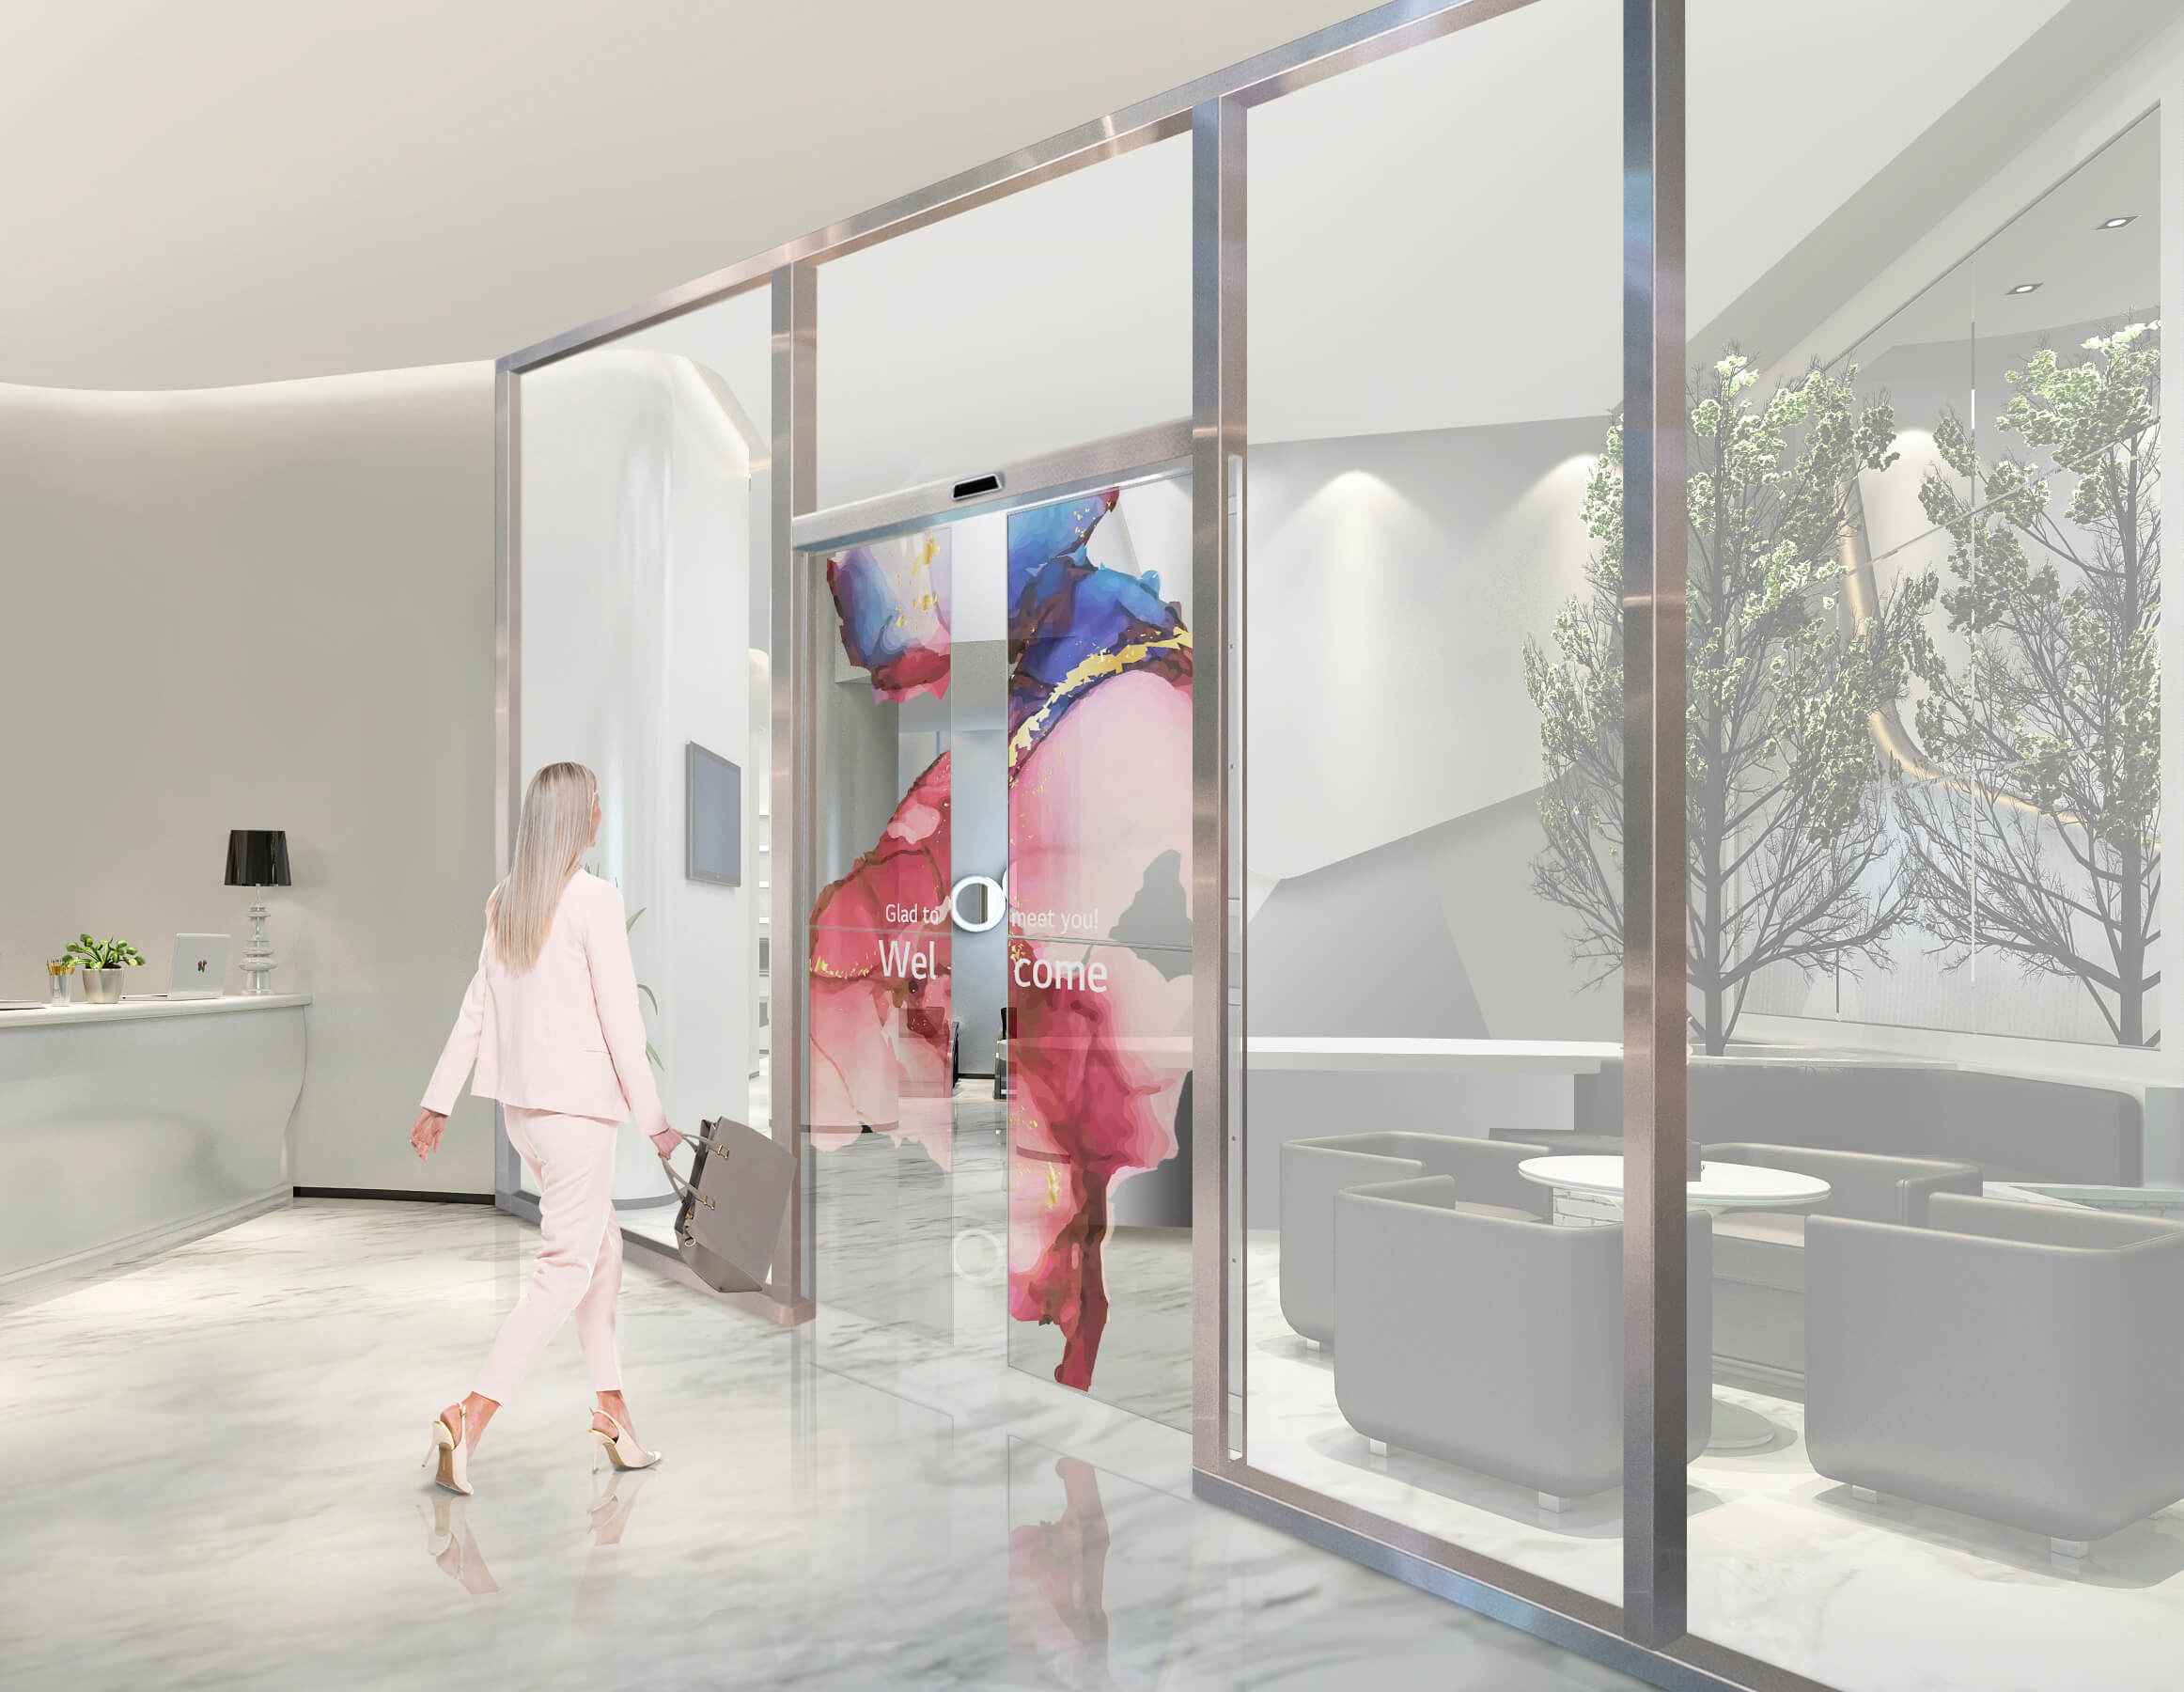 LG is developing a high-tech transparent OLED door